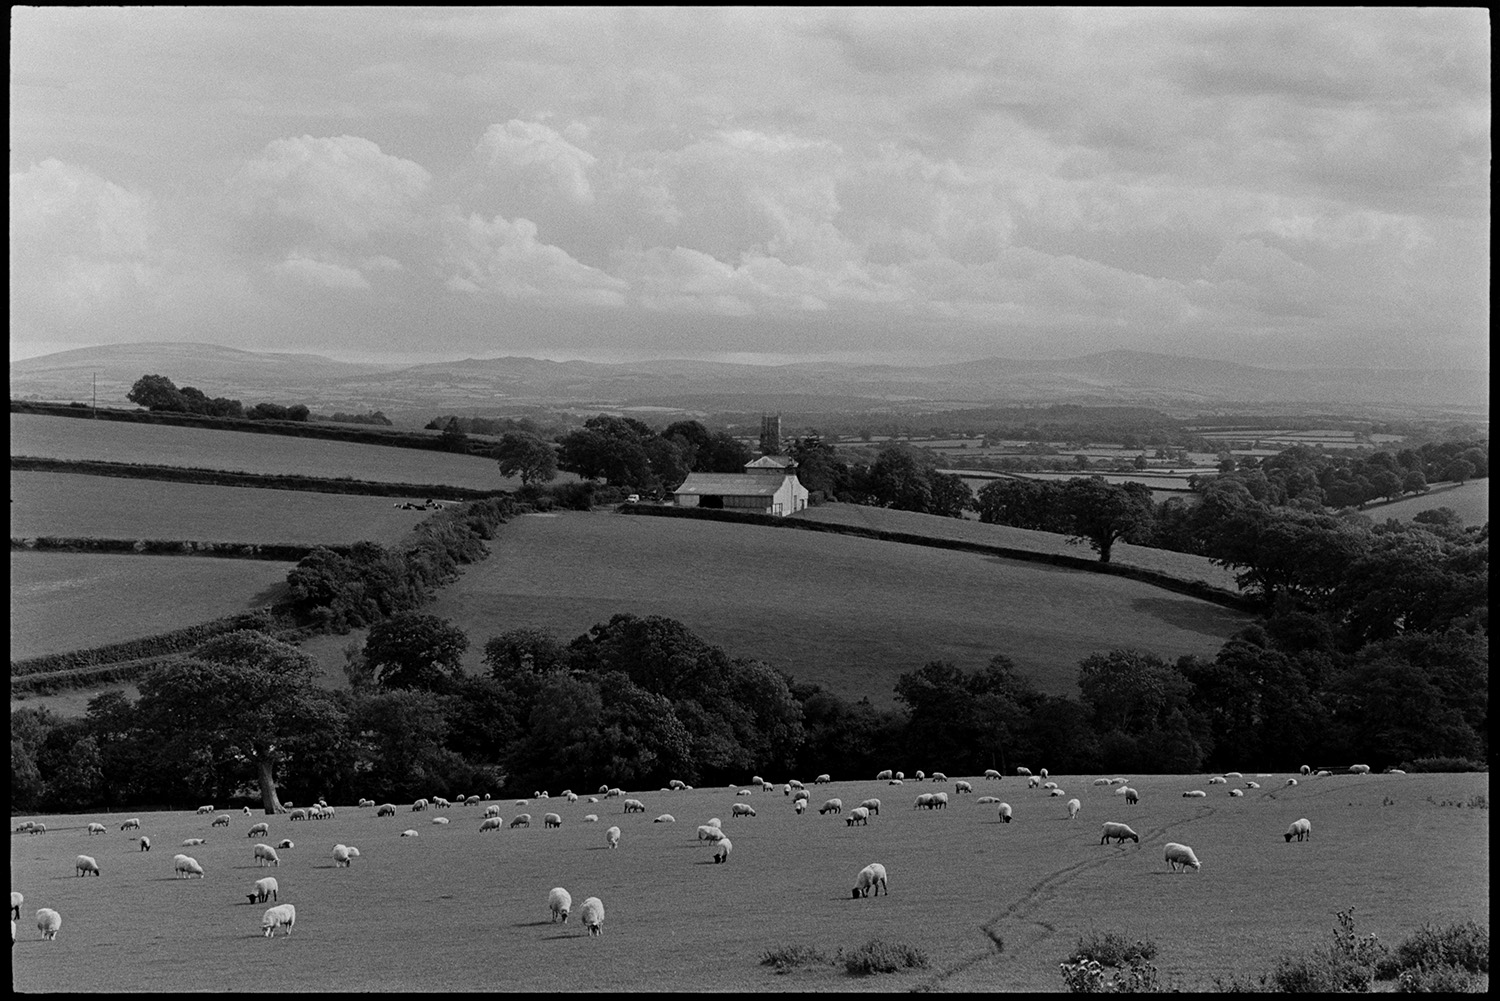 Test shot. Sheep grazing in a field. A landscape with fields, trees, farm buildings and a church tower can be seen beyond the field. Dartmoor is visible in the background.